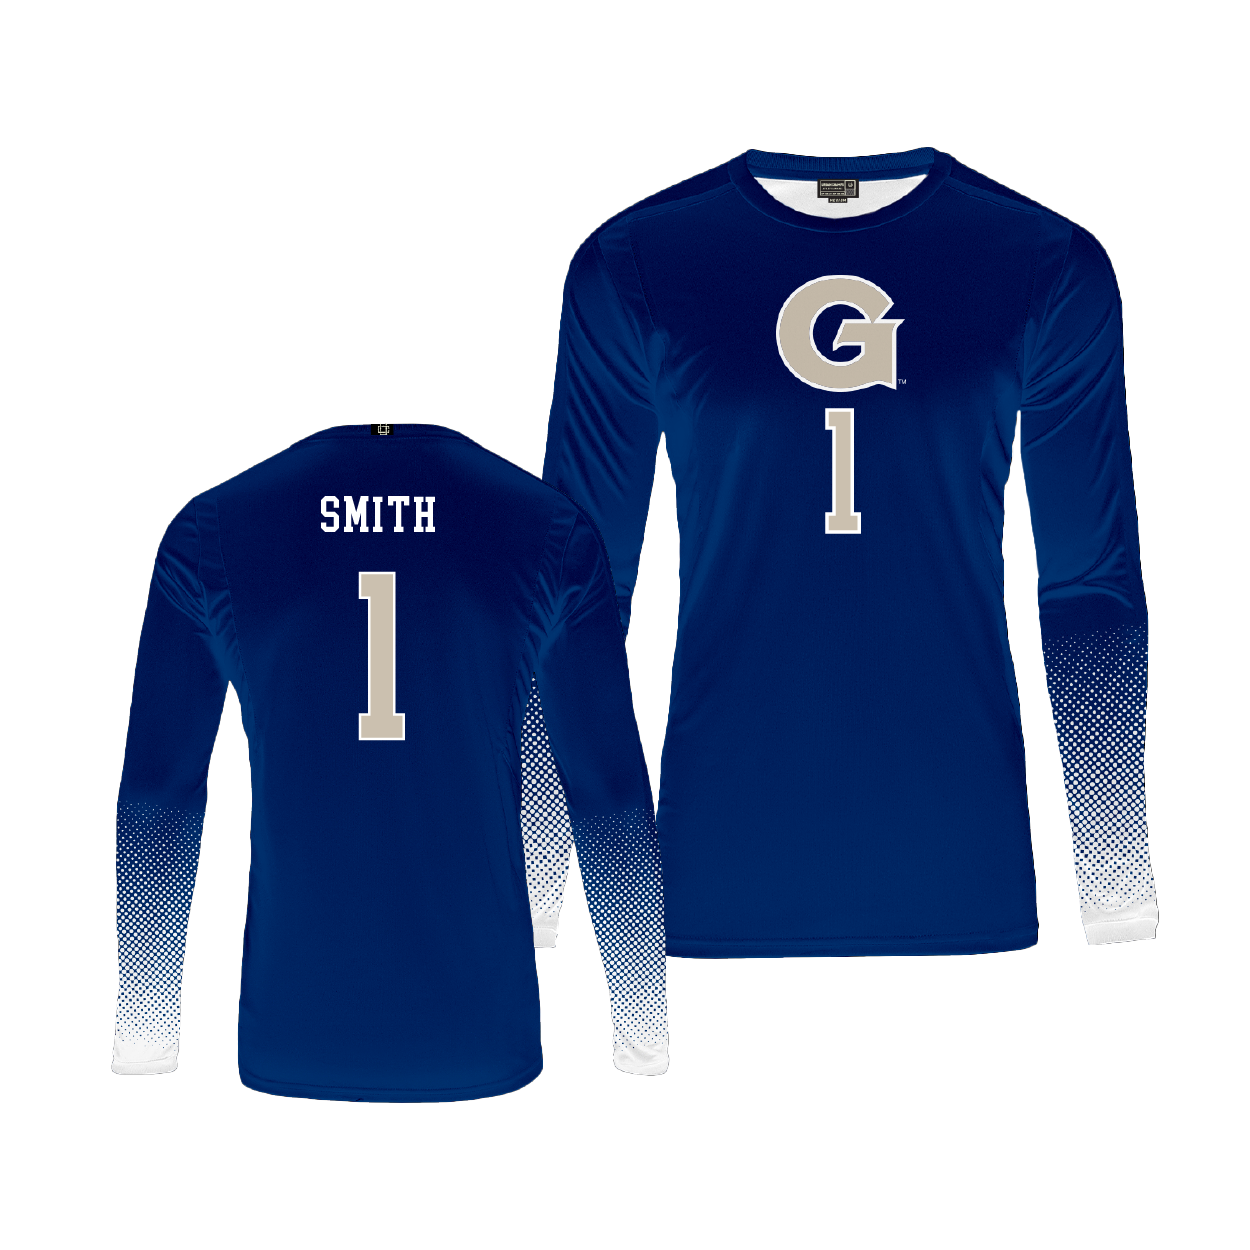 Georgetown Volleyball Navy Jersey - Chanelle Smith